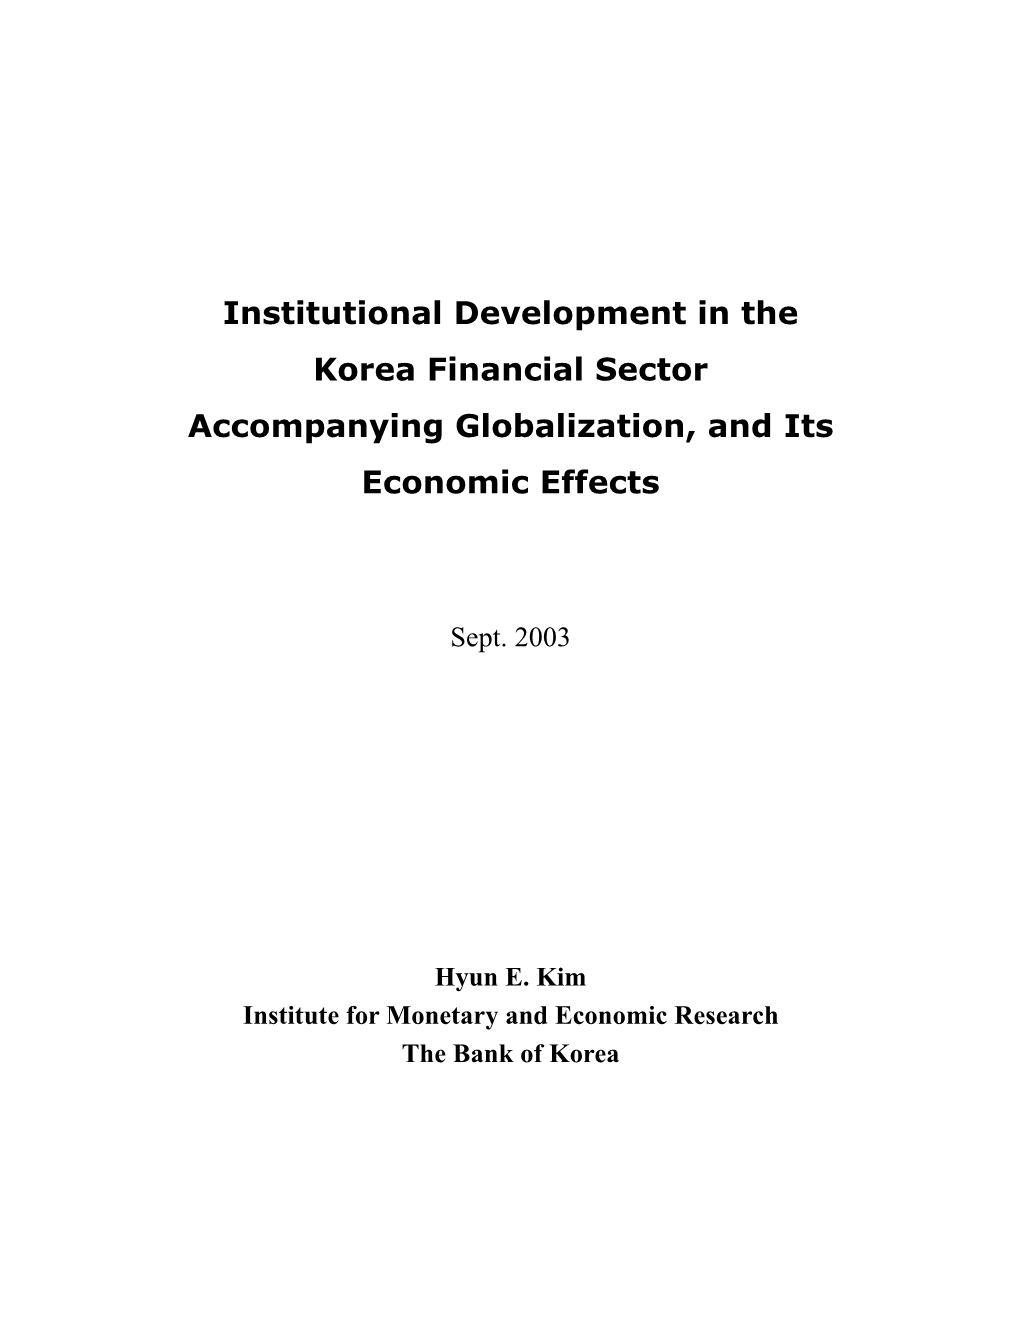 Institutional Development in the Korea Financial Sector Accompanying Globalization, and Its Economic Effects